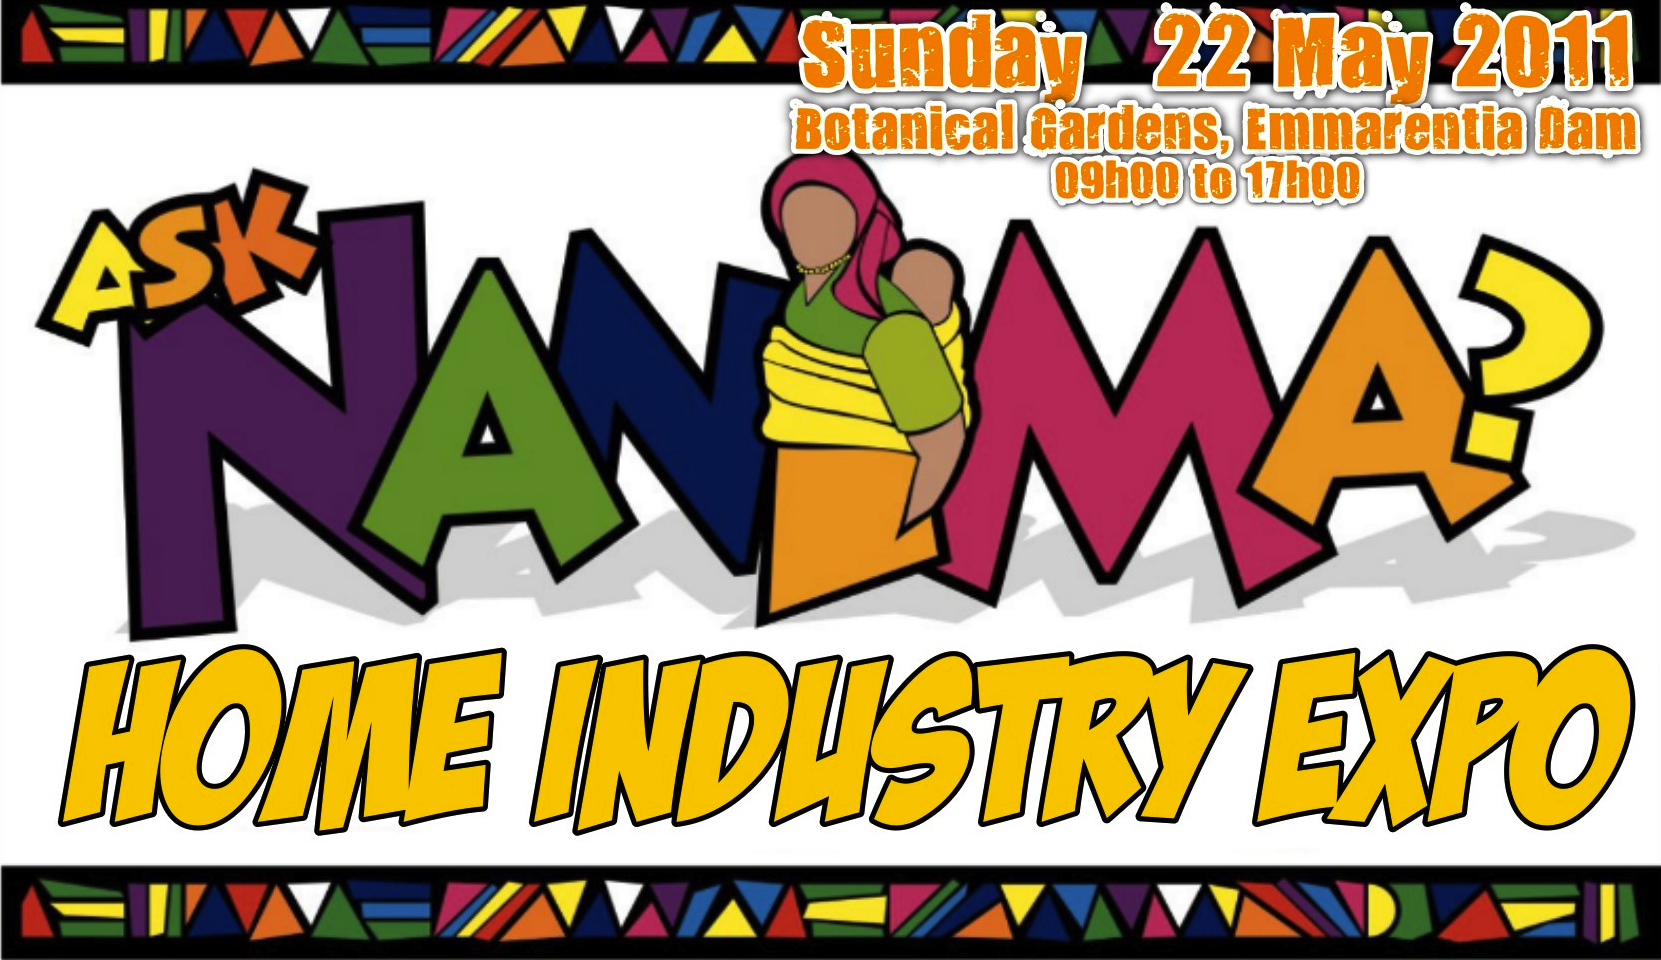 Reminder: Ask Nanima Home Industry Expo May 2011